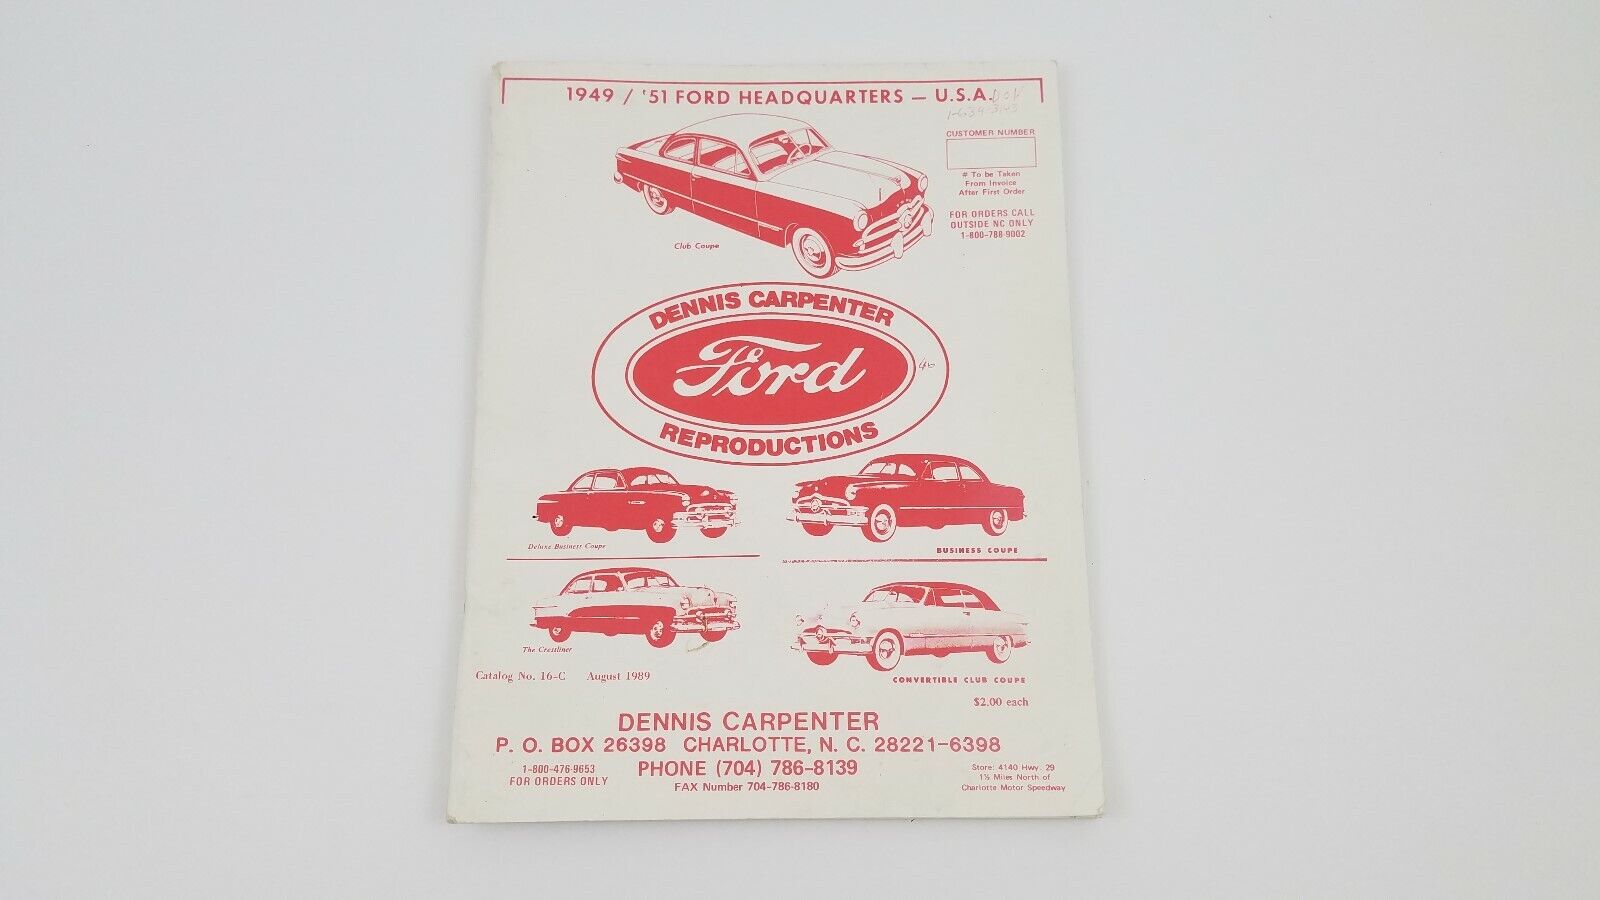 Dennis Carpenter FORD Reproductions 1949/51 Catalog Hot Rods Rat Rods  N9